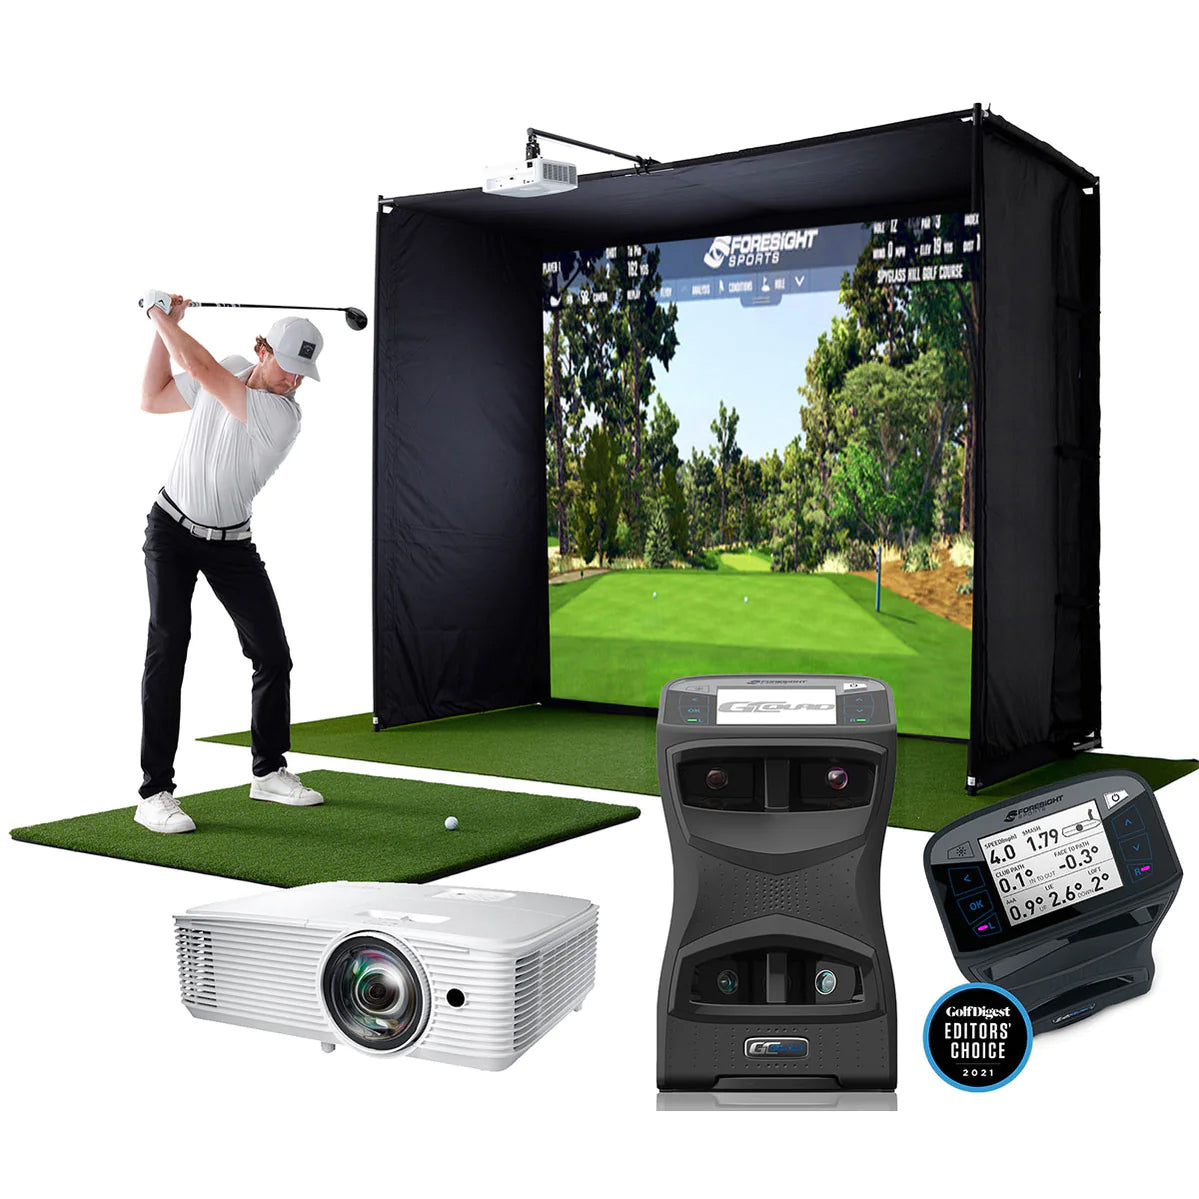 A golfer in the PlayBetter SimStudio with gaming projector and the GCQuad by Foresight Sports in the foreground